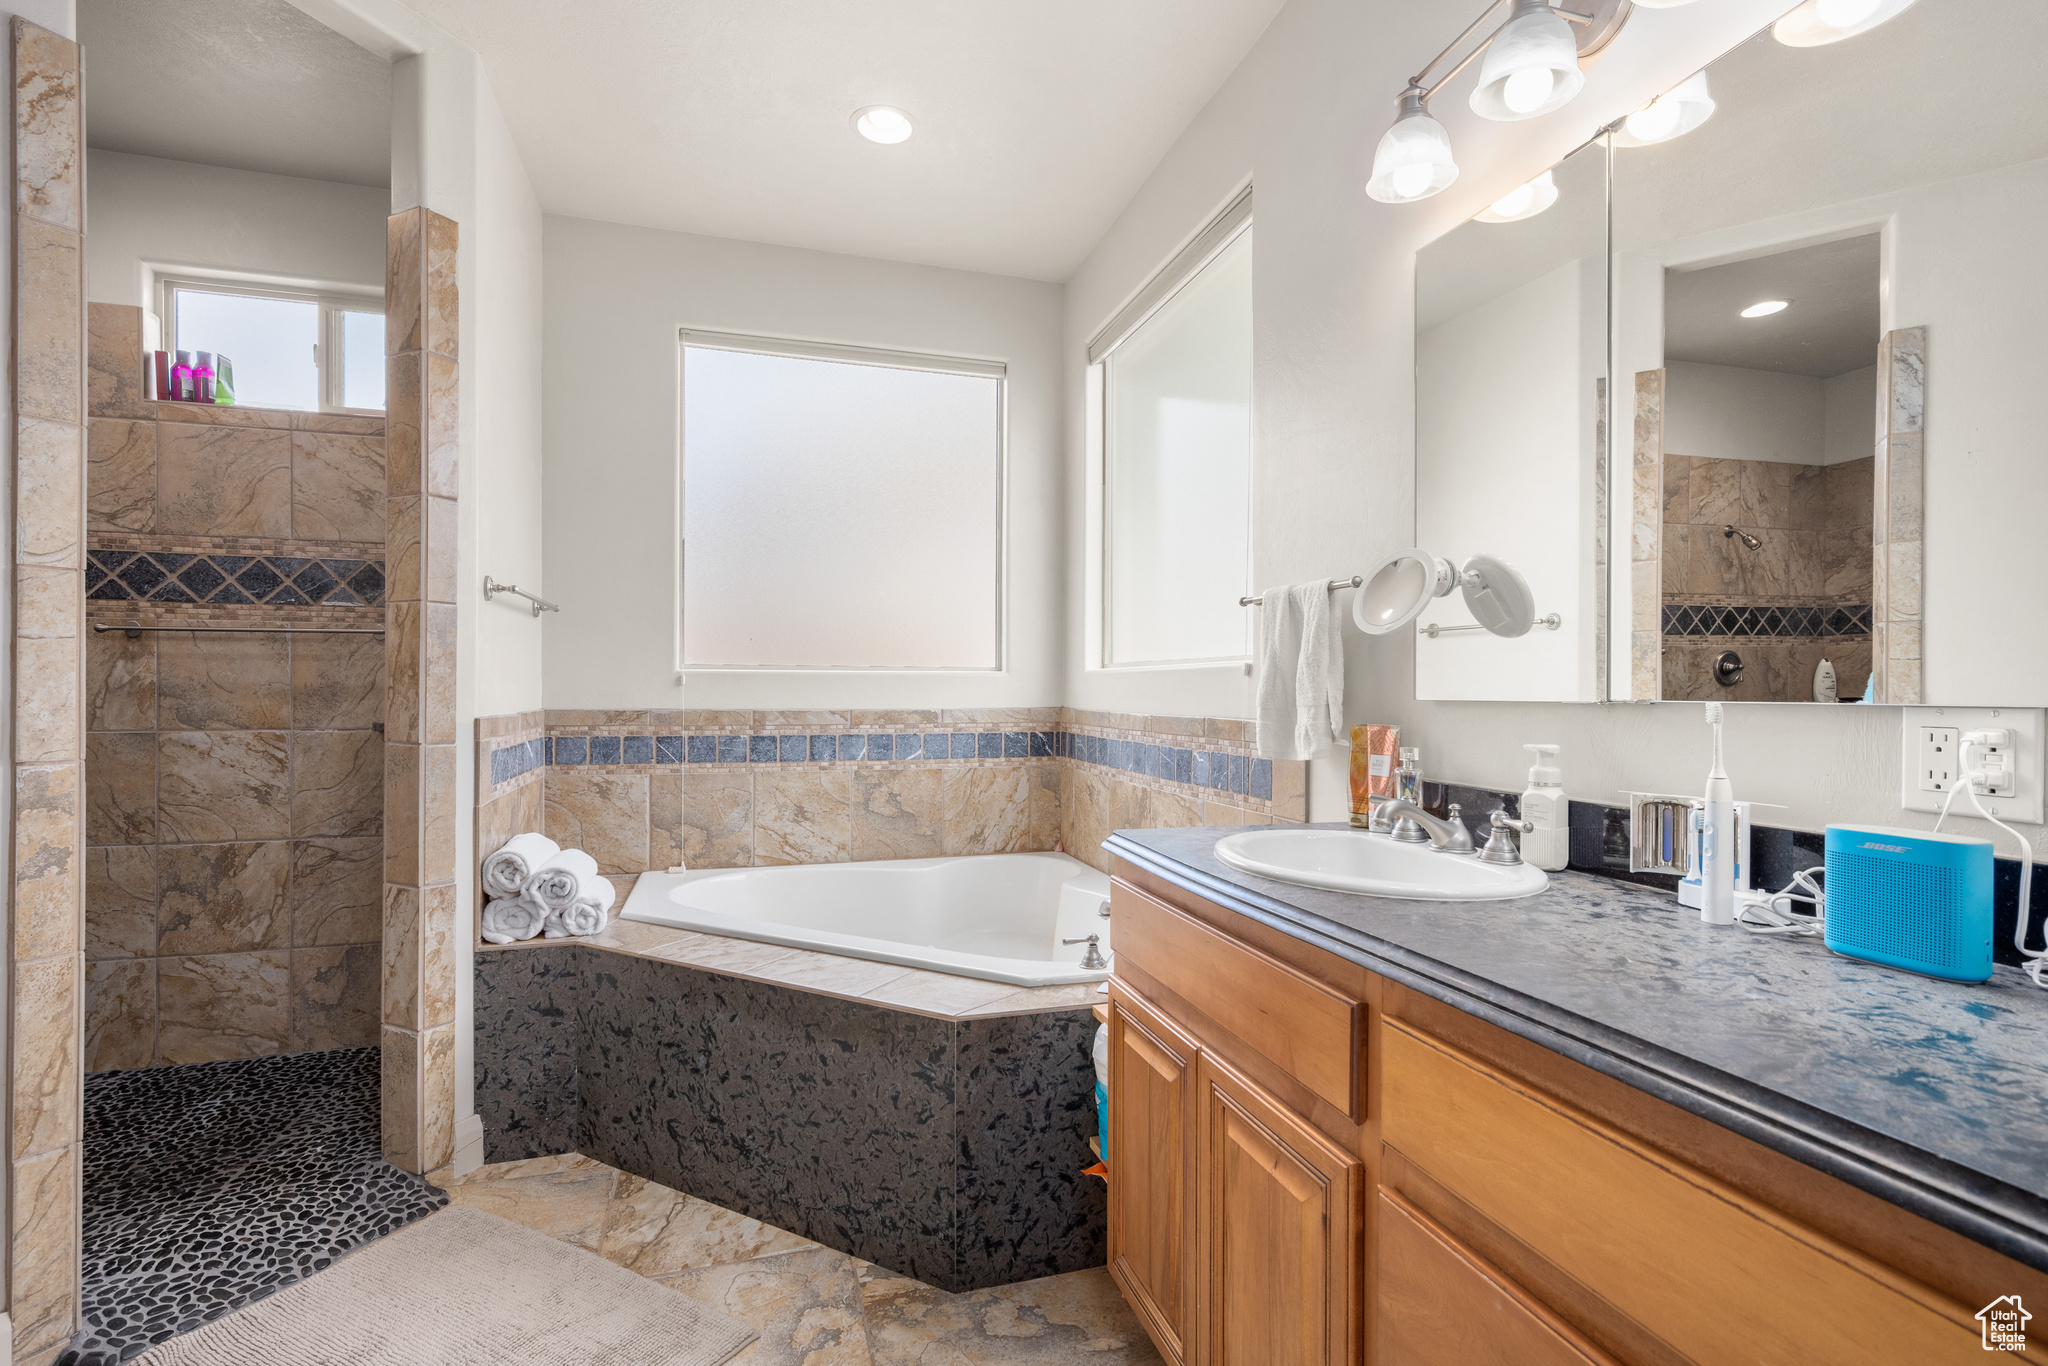 Bathroom featuring tile floors, vanity, and independent shower and bath